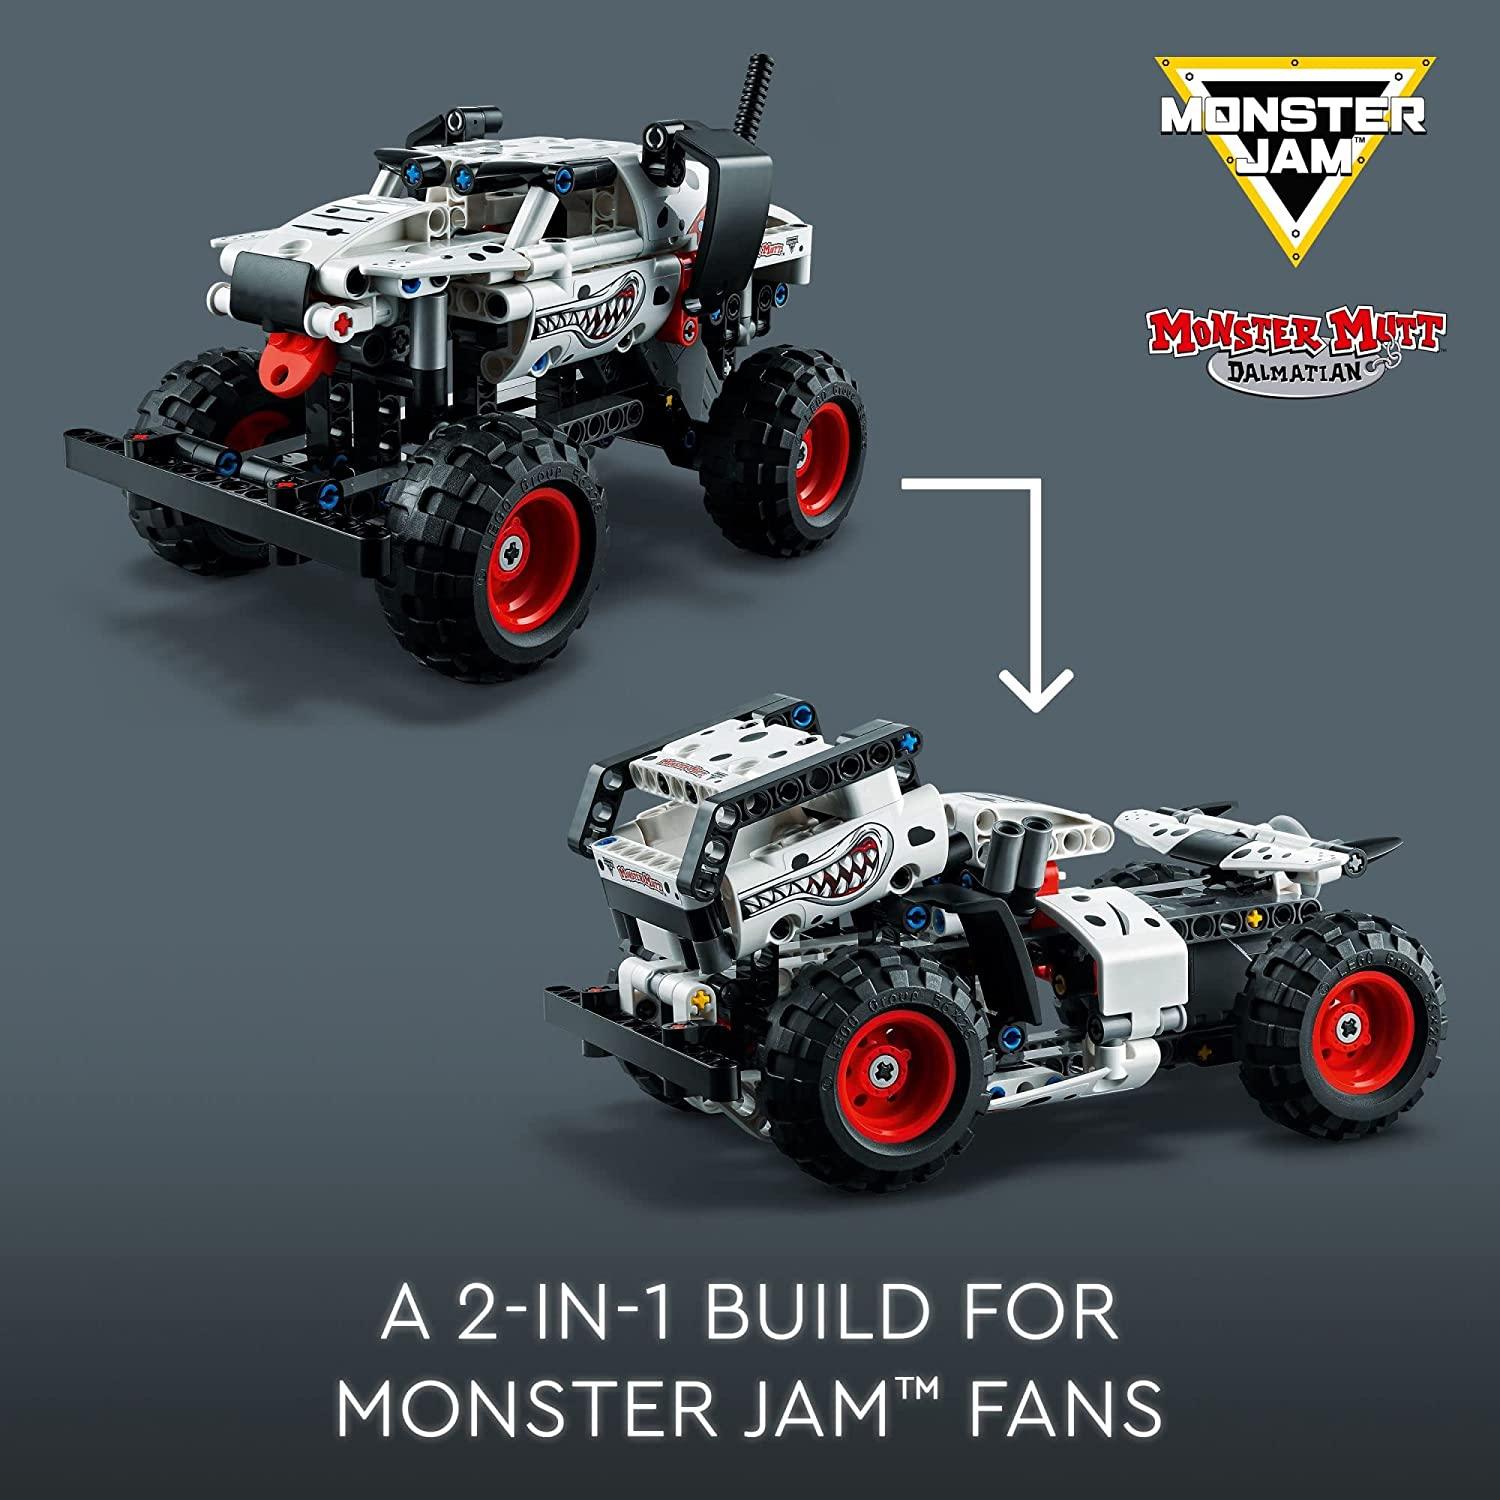 LEGO Technic Monster Jam Monster Mutt Dalmatian 42150, Truck Toy for Kids, Boys and Girls Ages 7 Plus, 2in1 Pull Back Racing Toys, Birthday Gift Idea - BumbleToys - 6+ Years, Boys, LEGO, Monster Jam, OXE, Pre-Order, Technic